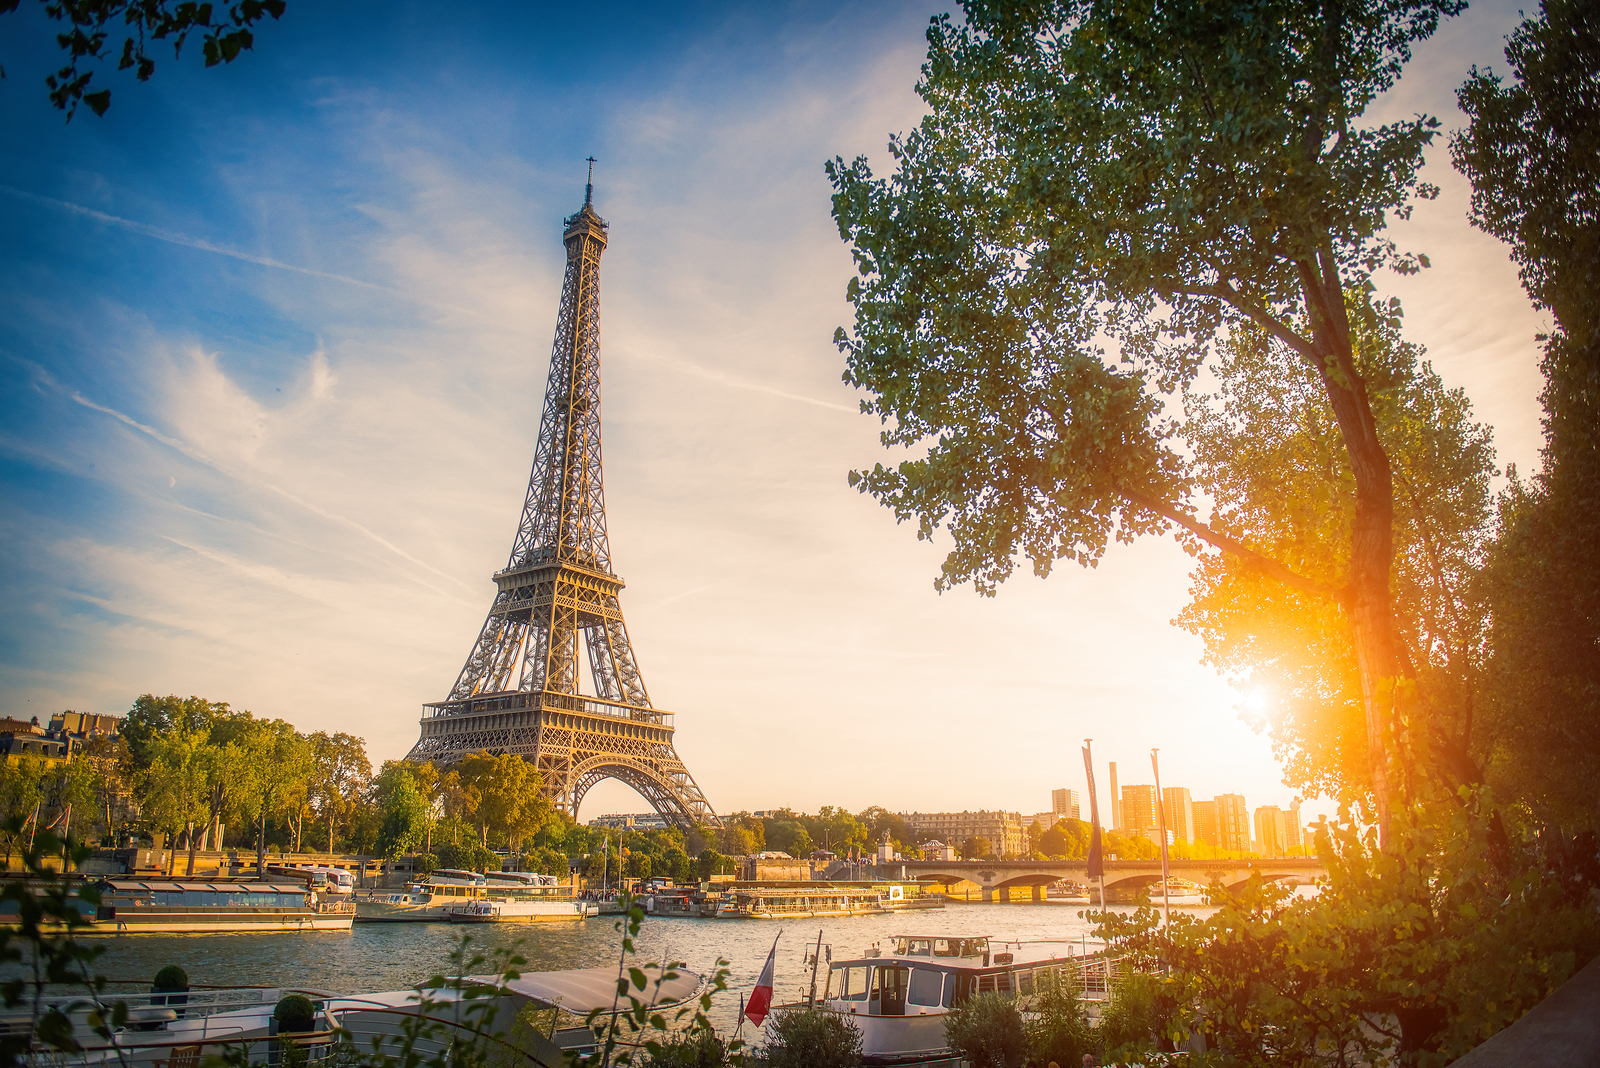 Sunset View Of Eiffel Tower And Seine River In Paris, France.